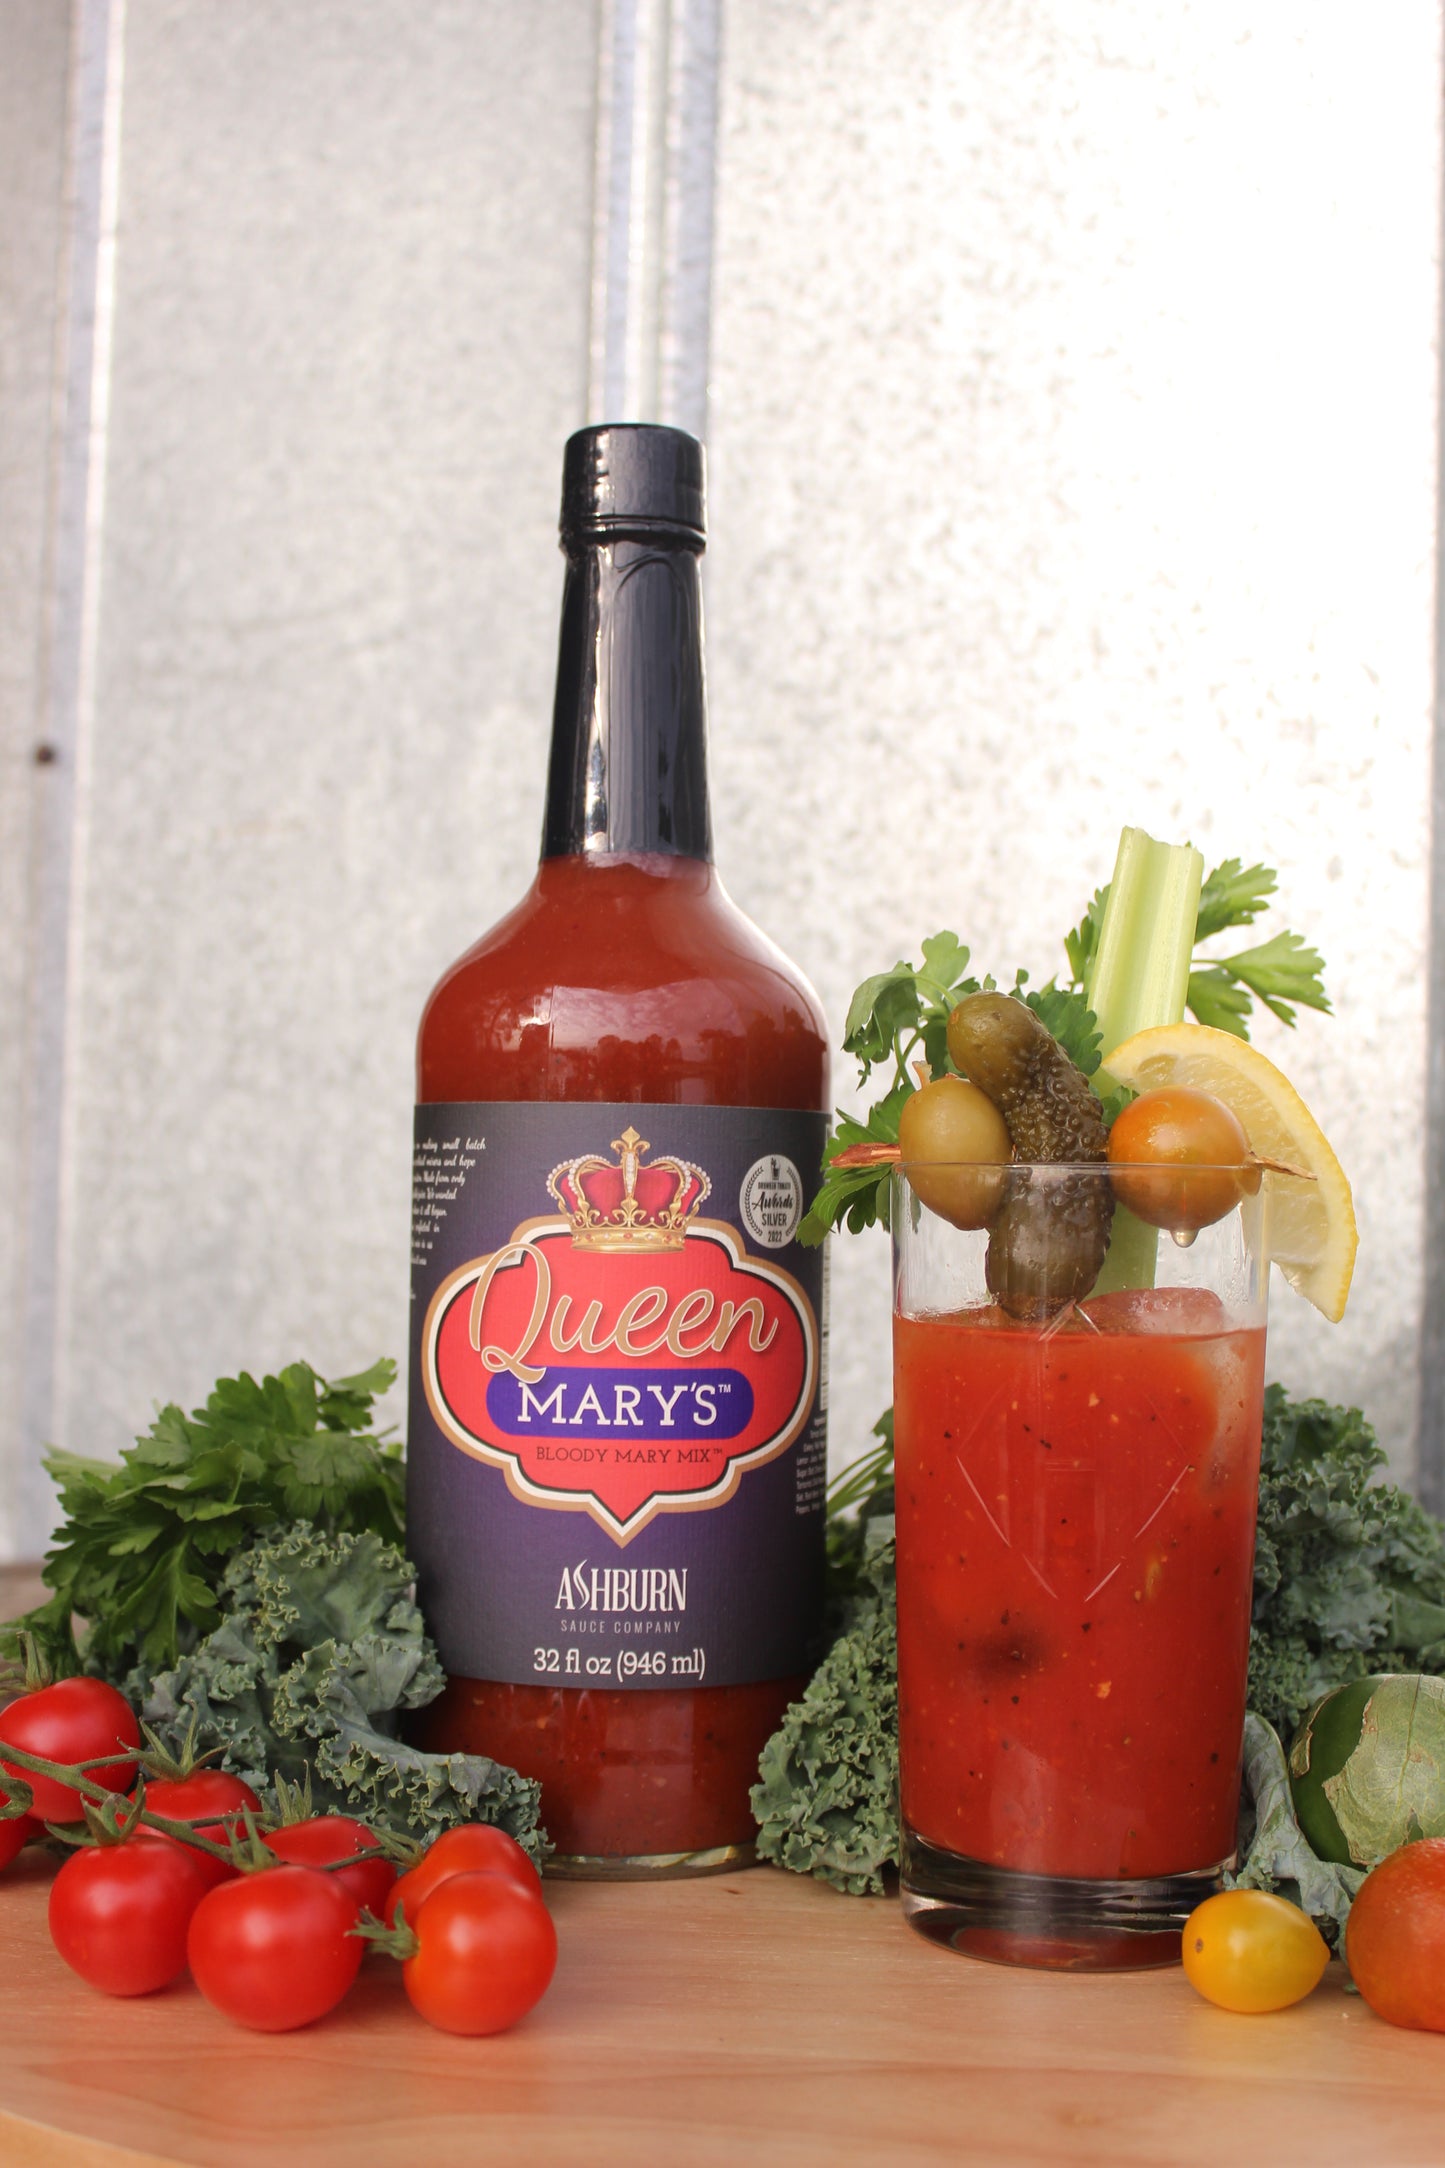 Ashburn Queen Mary's Bloody Mary Mix, 32 oz